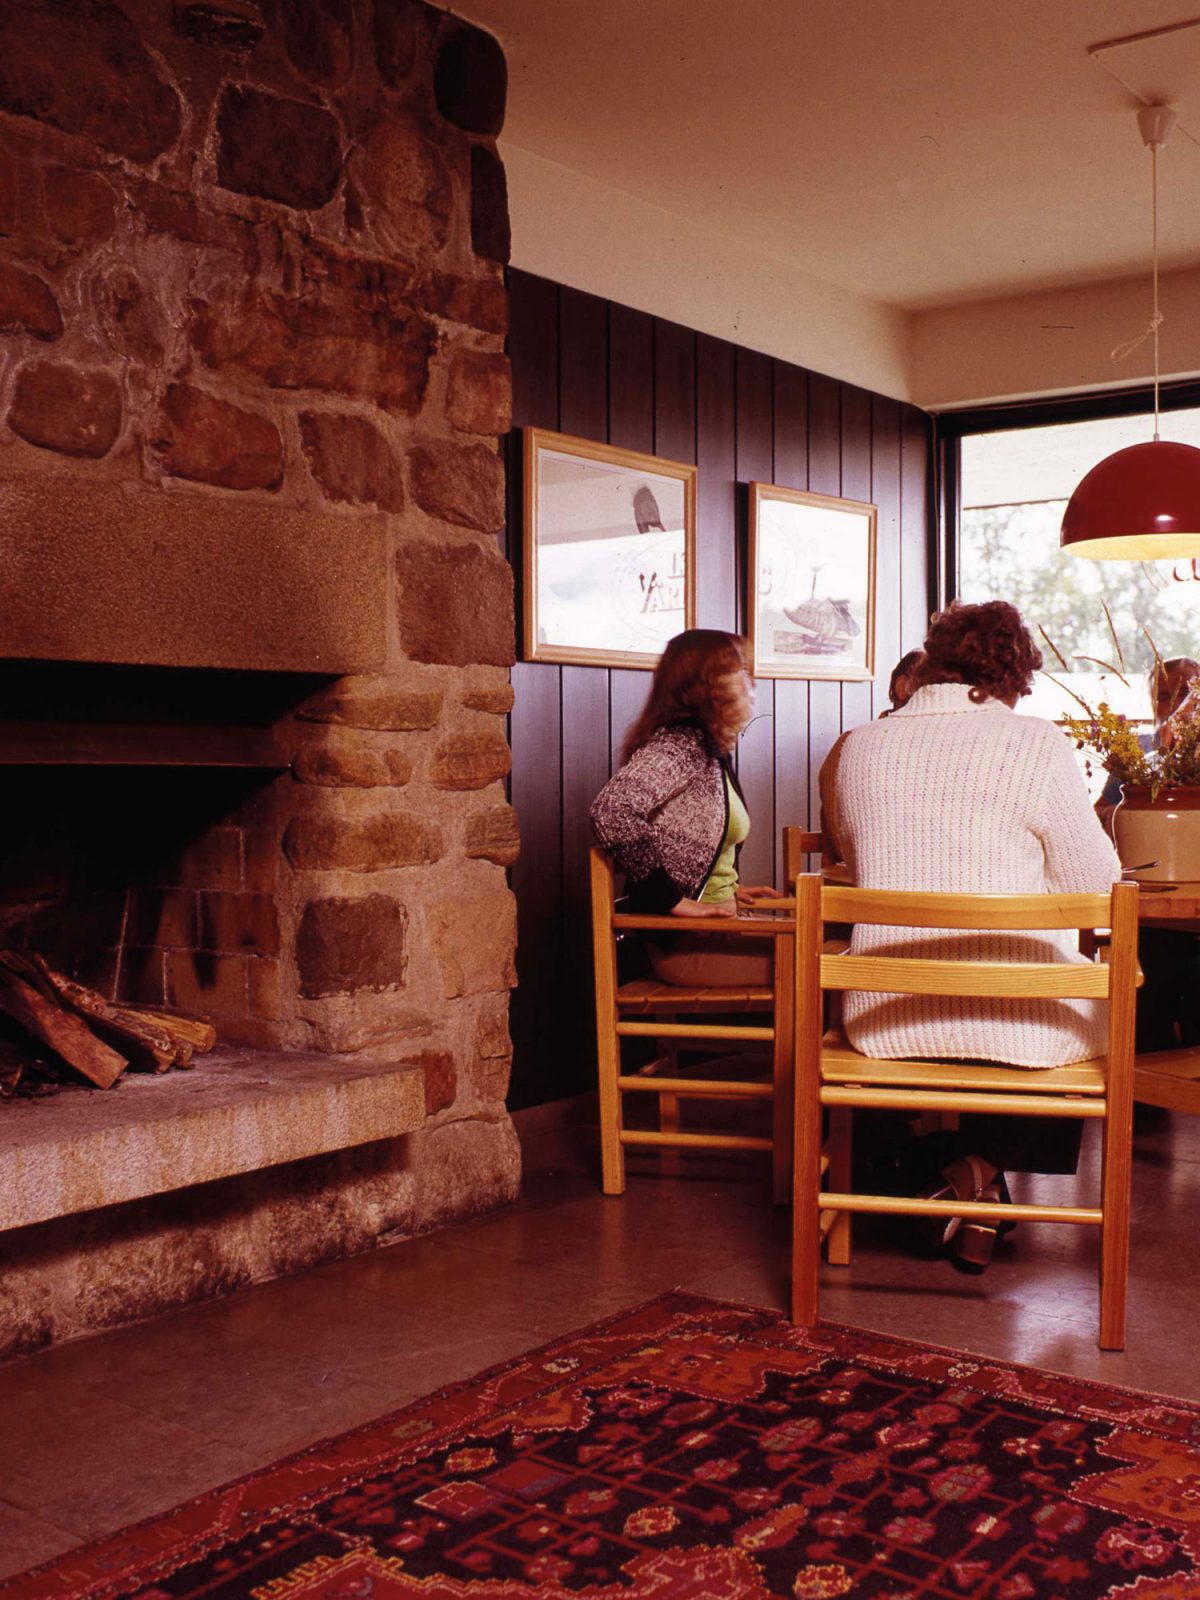 Brick fireplace in 1970s style restaurant, diners sitting at a table.